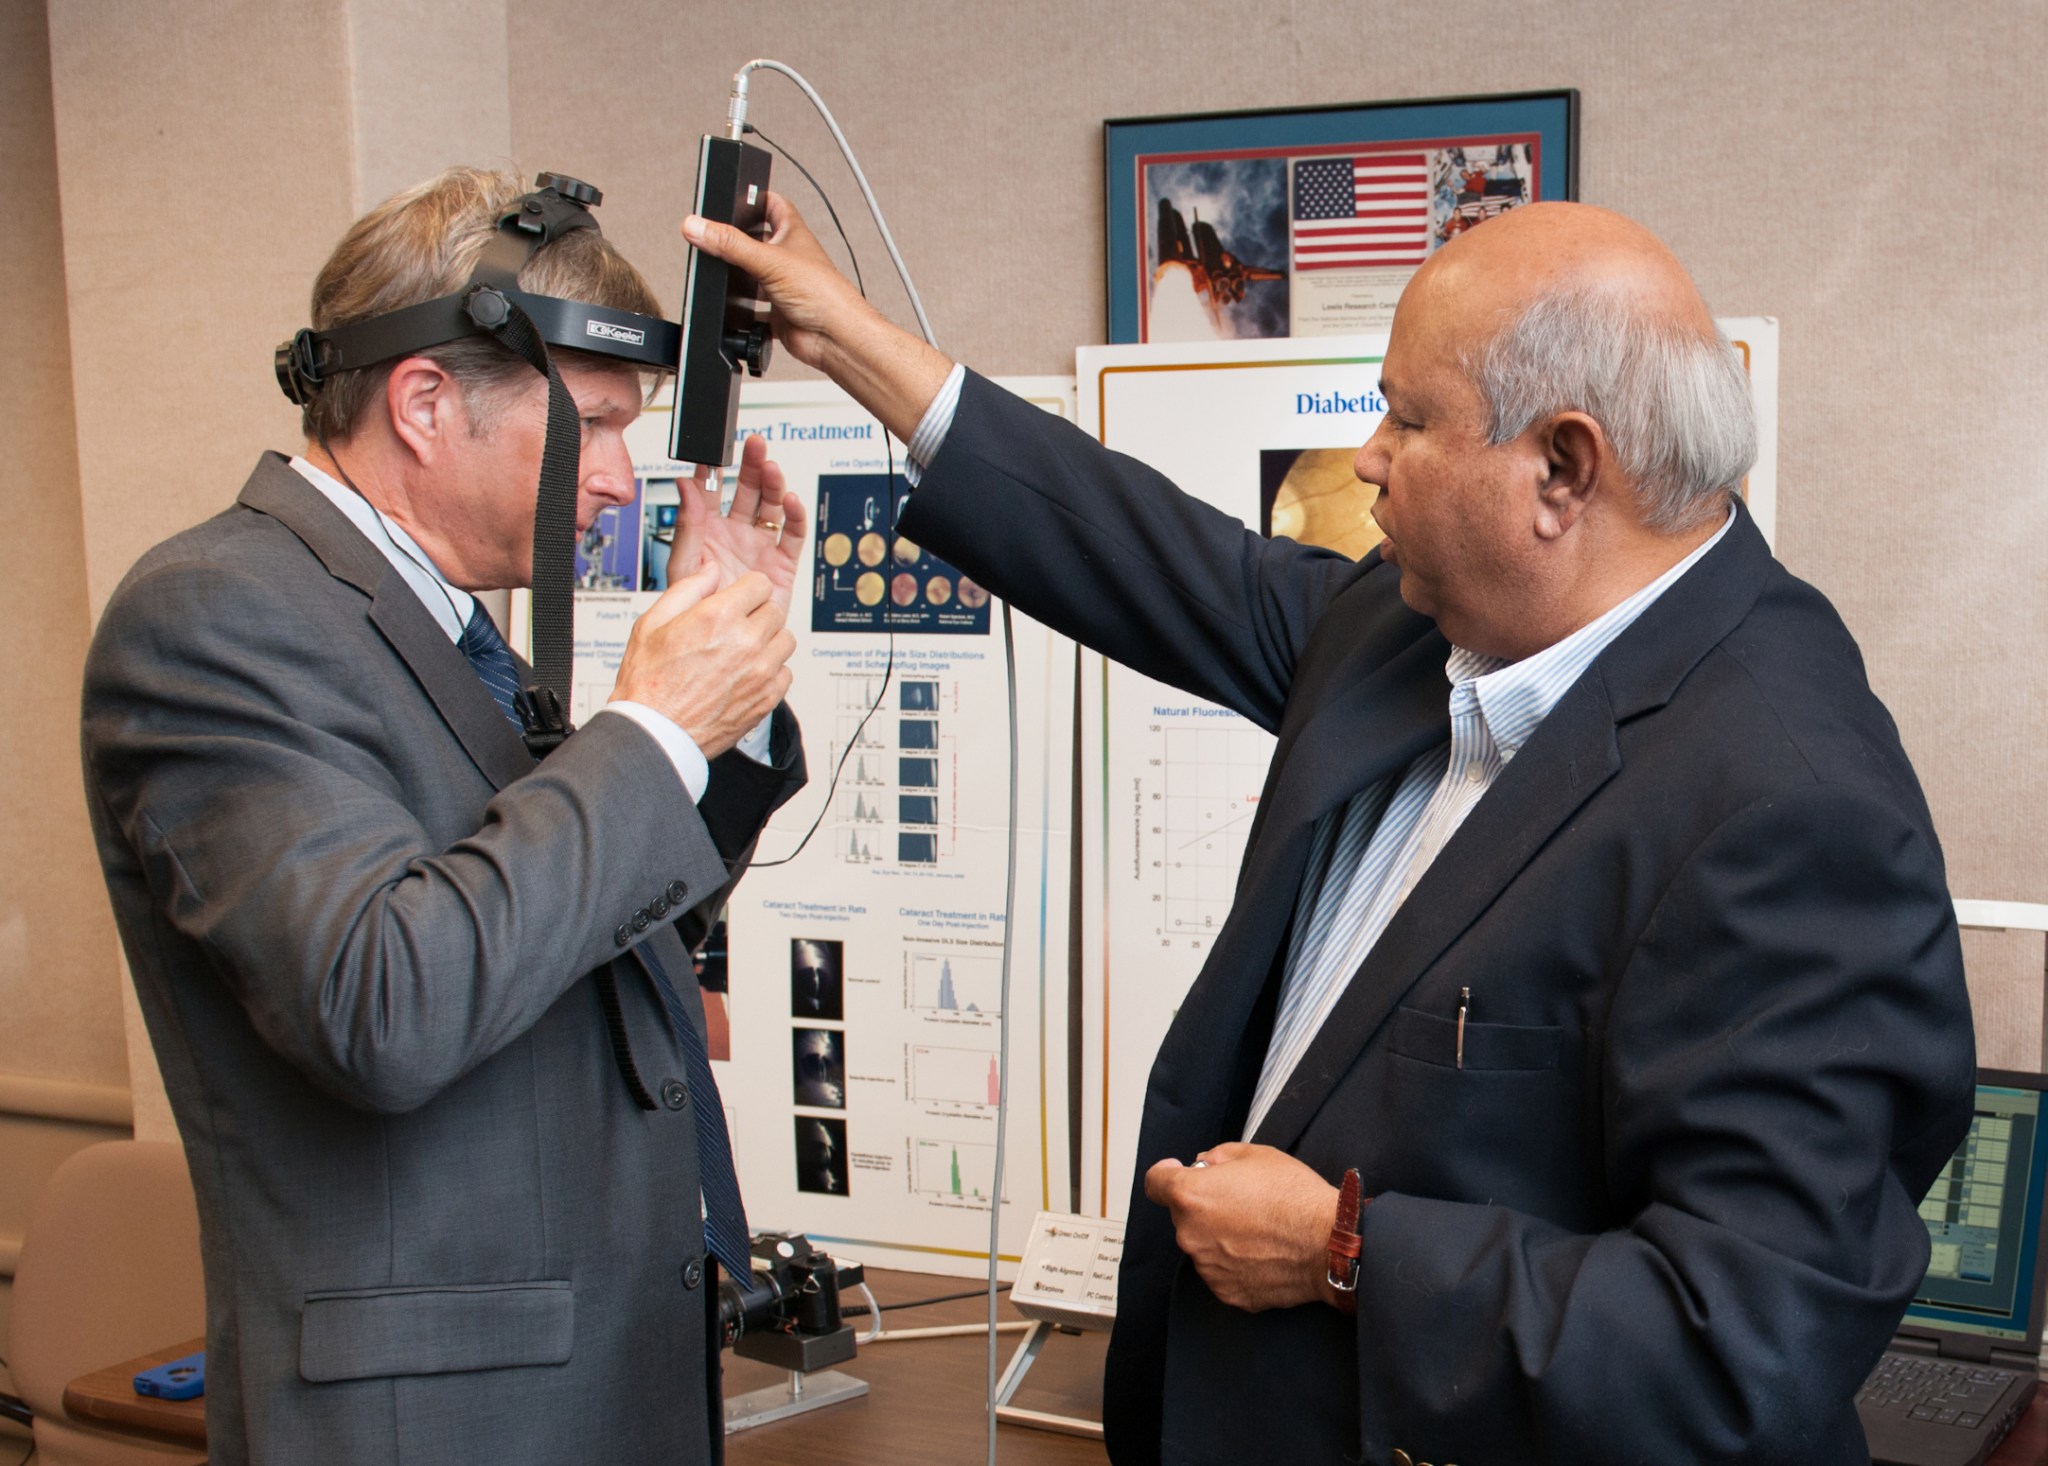 Man adjusts measurement equipment on the head of another man.